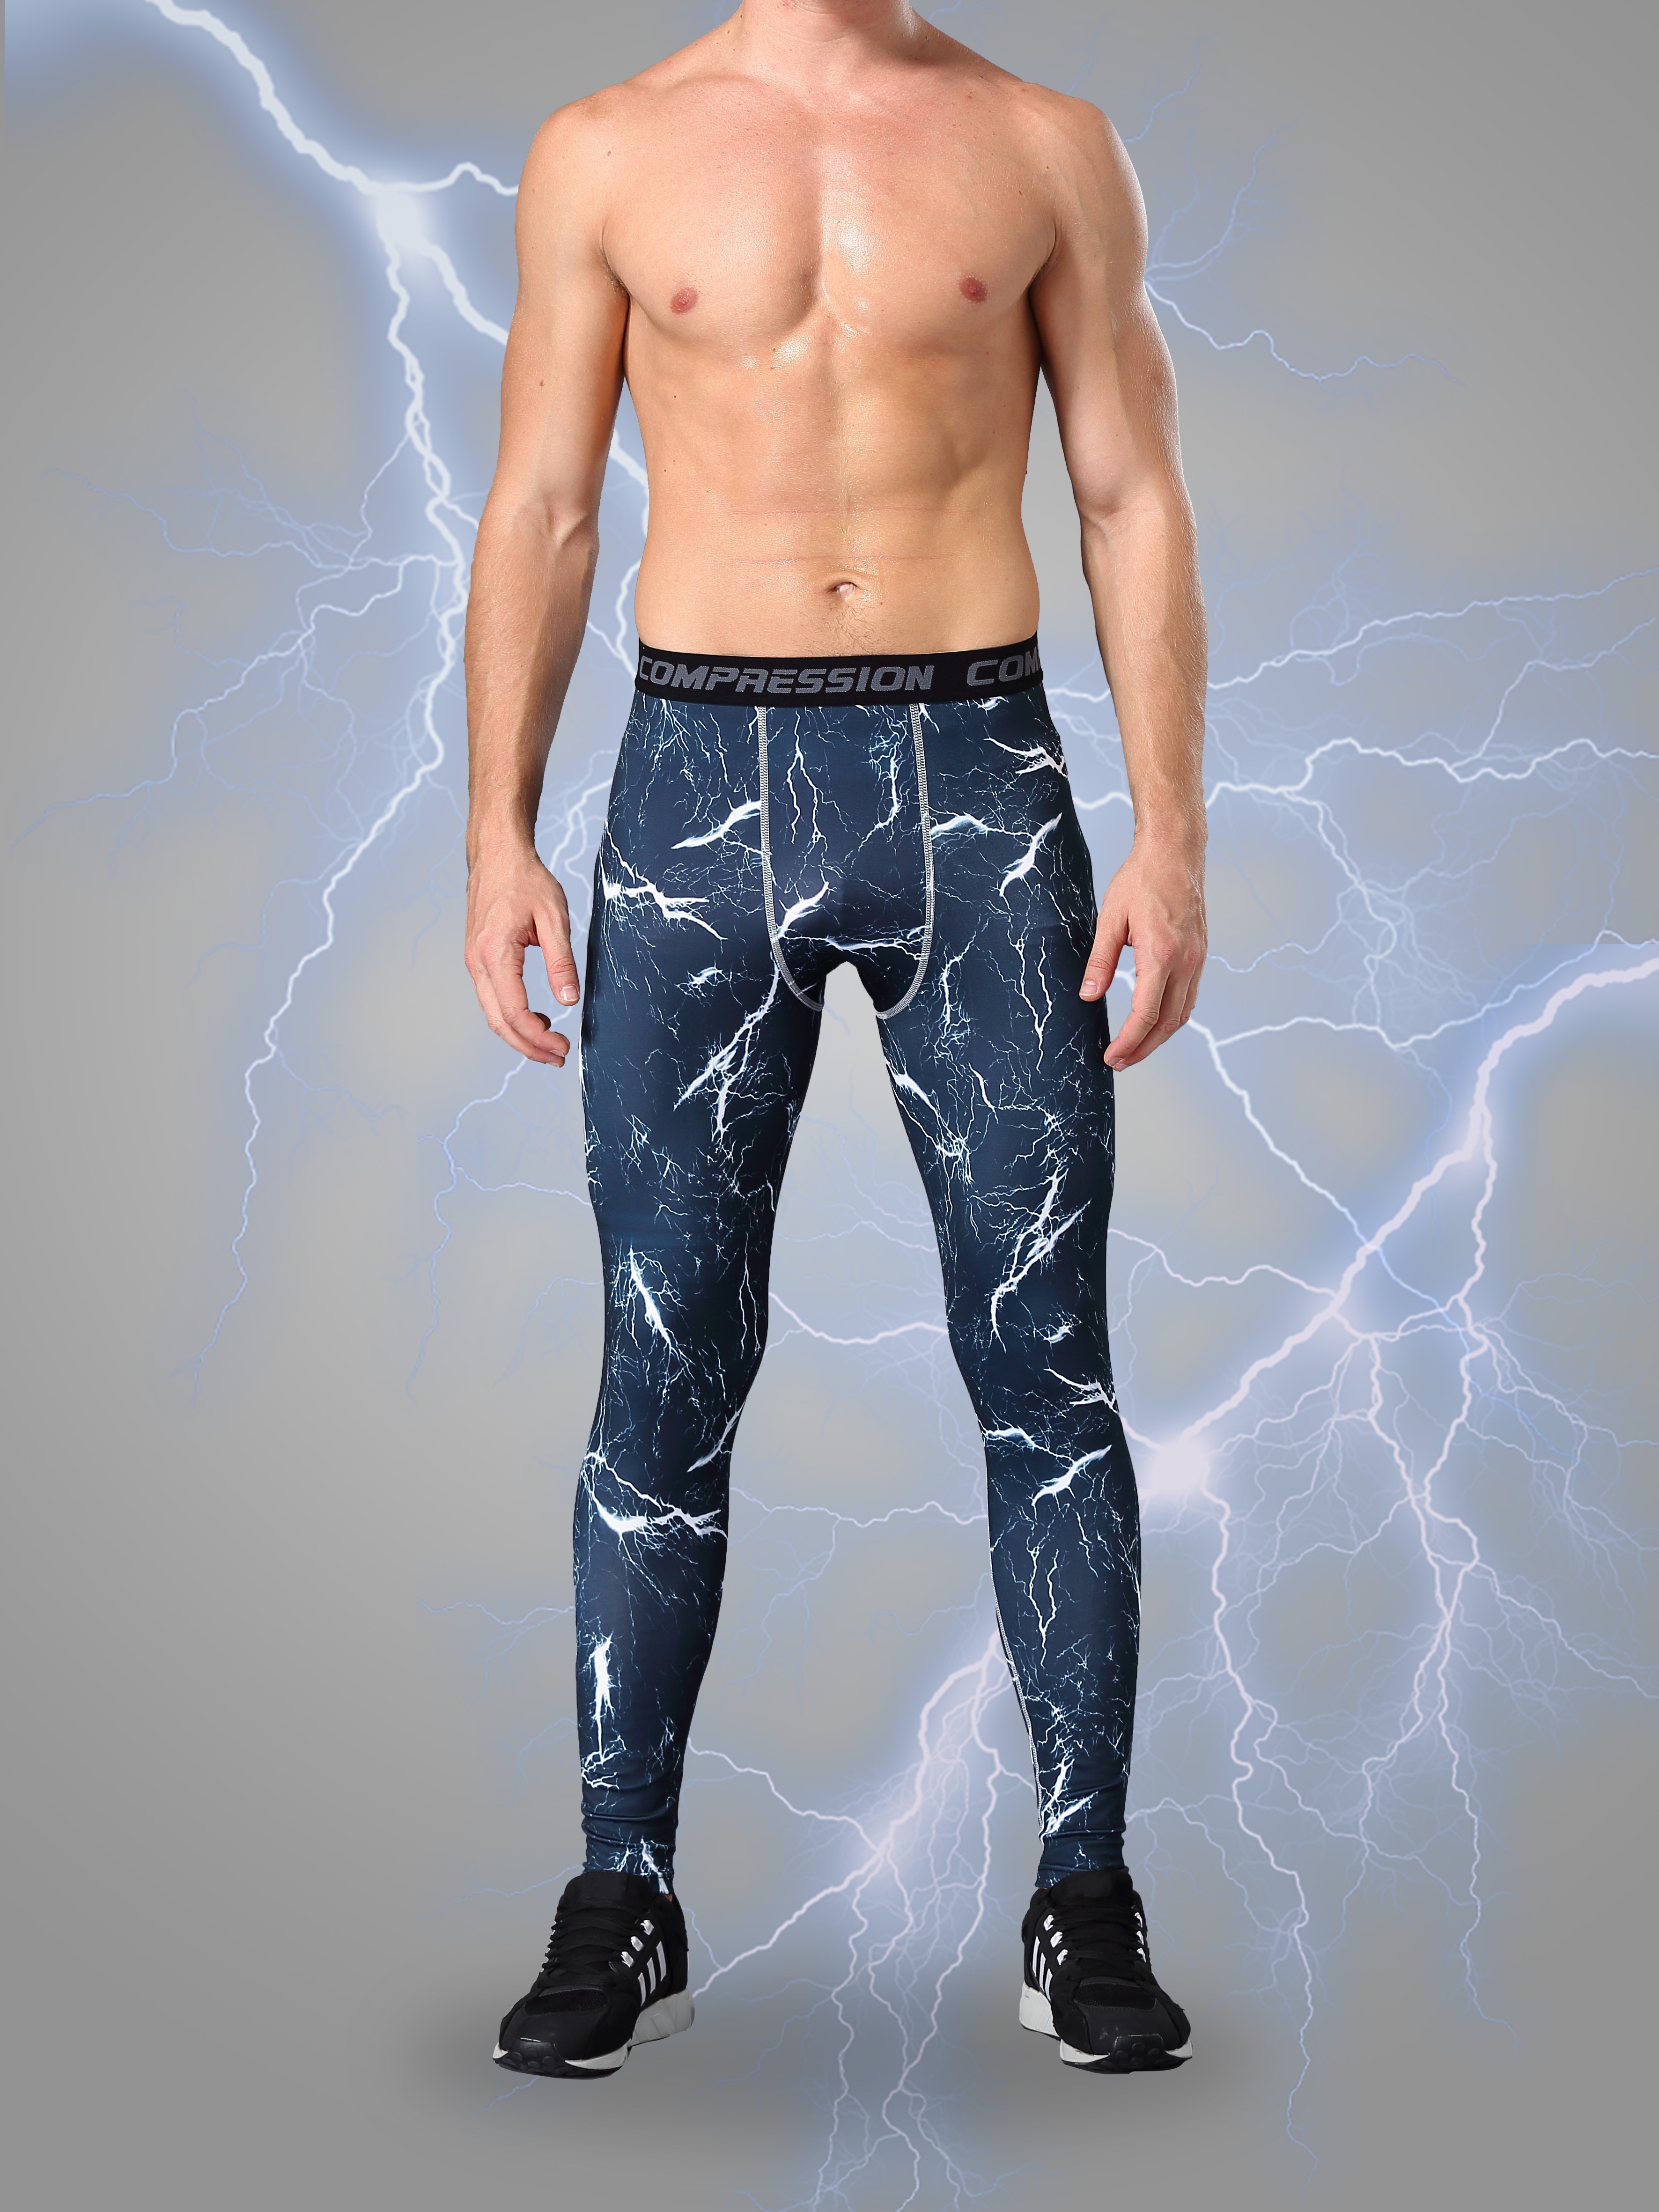 Basketball Tight Pants/High Elasticity Quick-drying Fitness Training Sports  Bottoming Pants